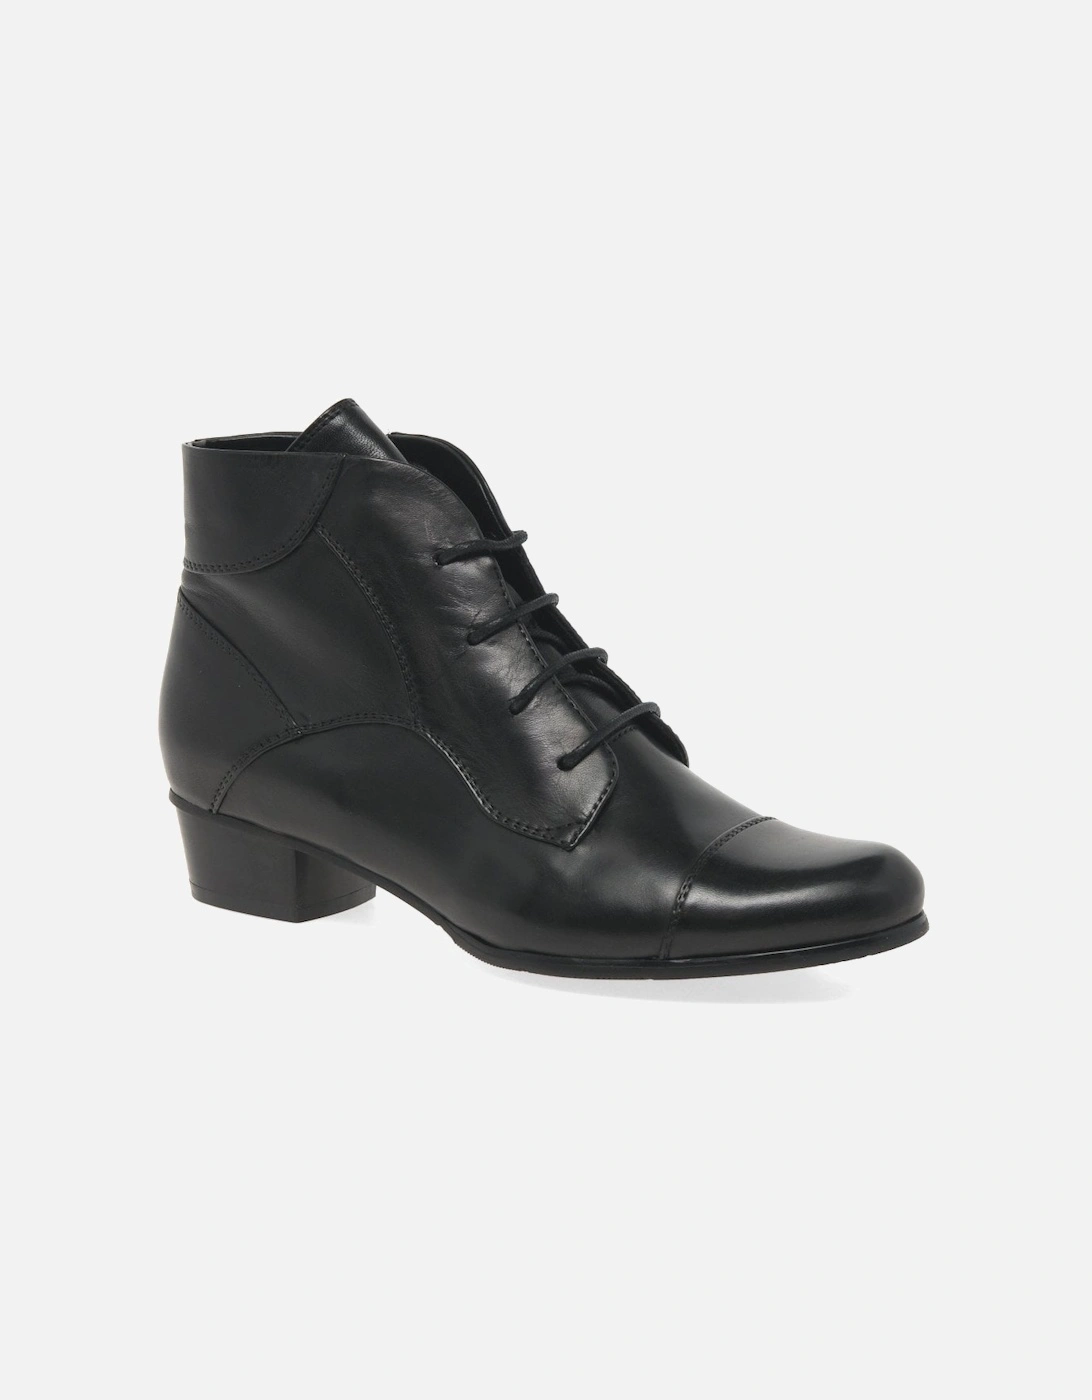 Stefany 123 Womens Victorian Ankle Boots, 8 of 7